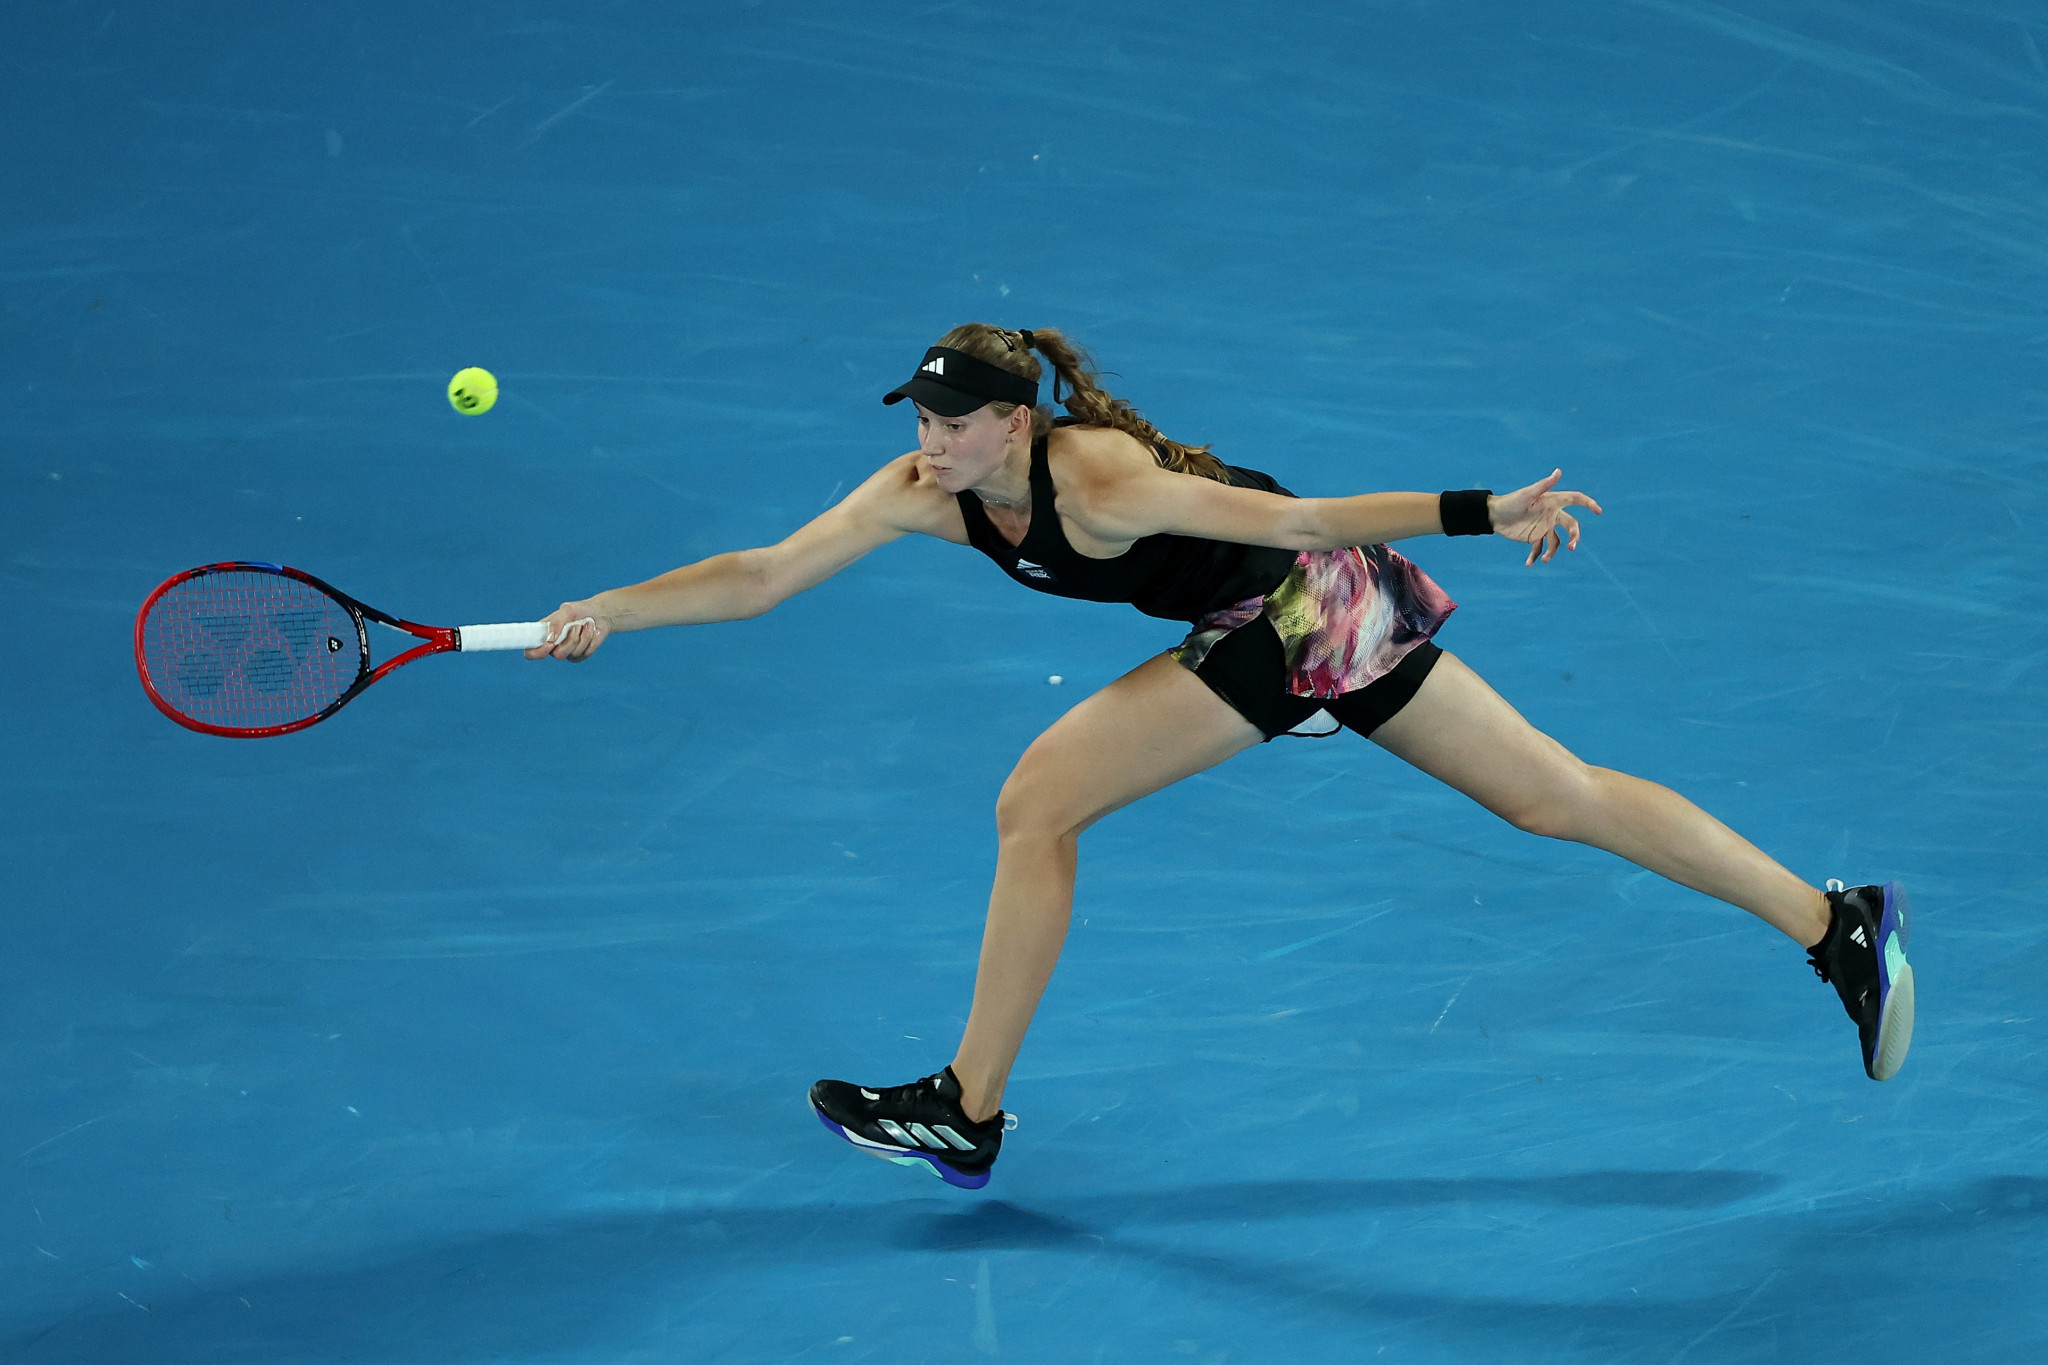 Rybakina scrambles to retrieve the ball as she battled hard against the Belarusian ©Getty Images